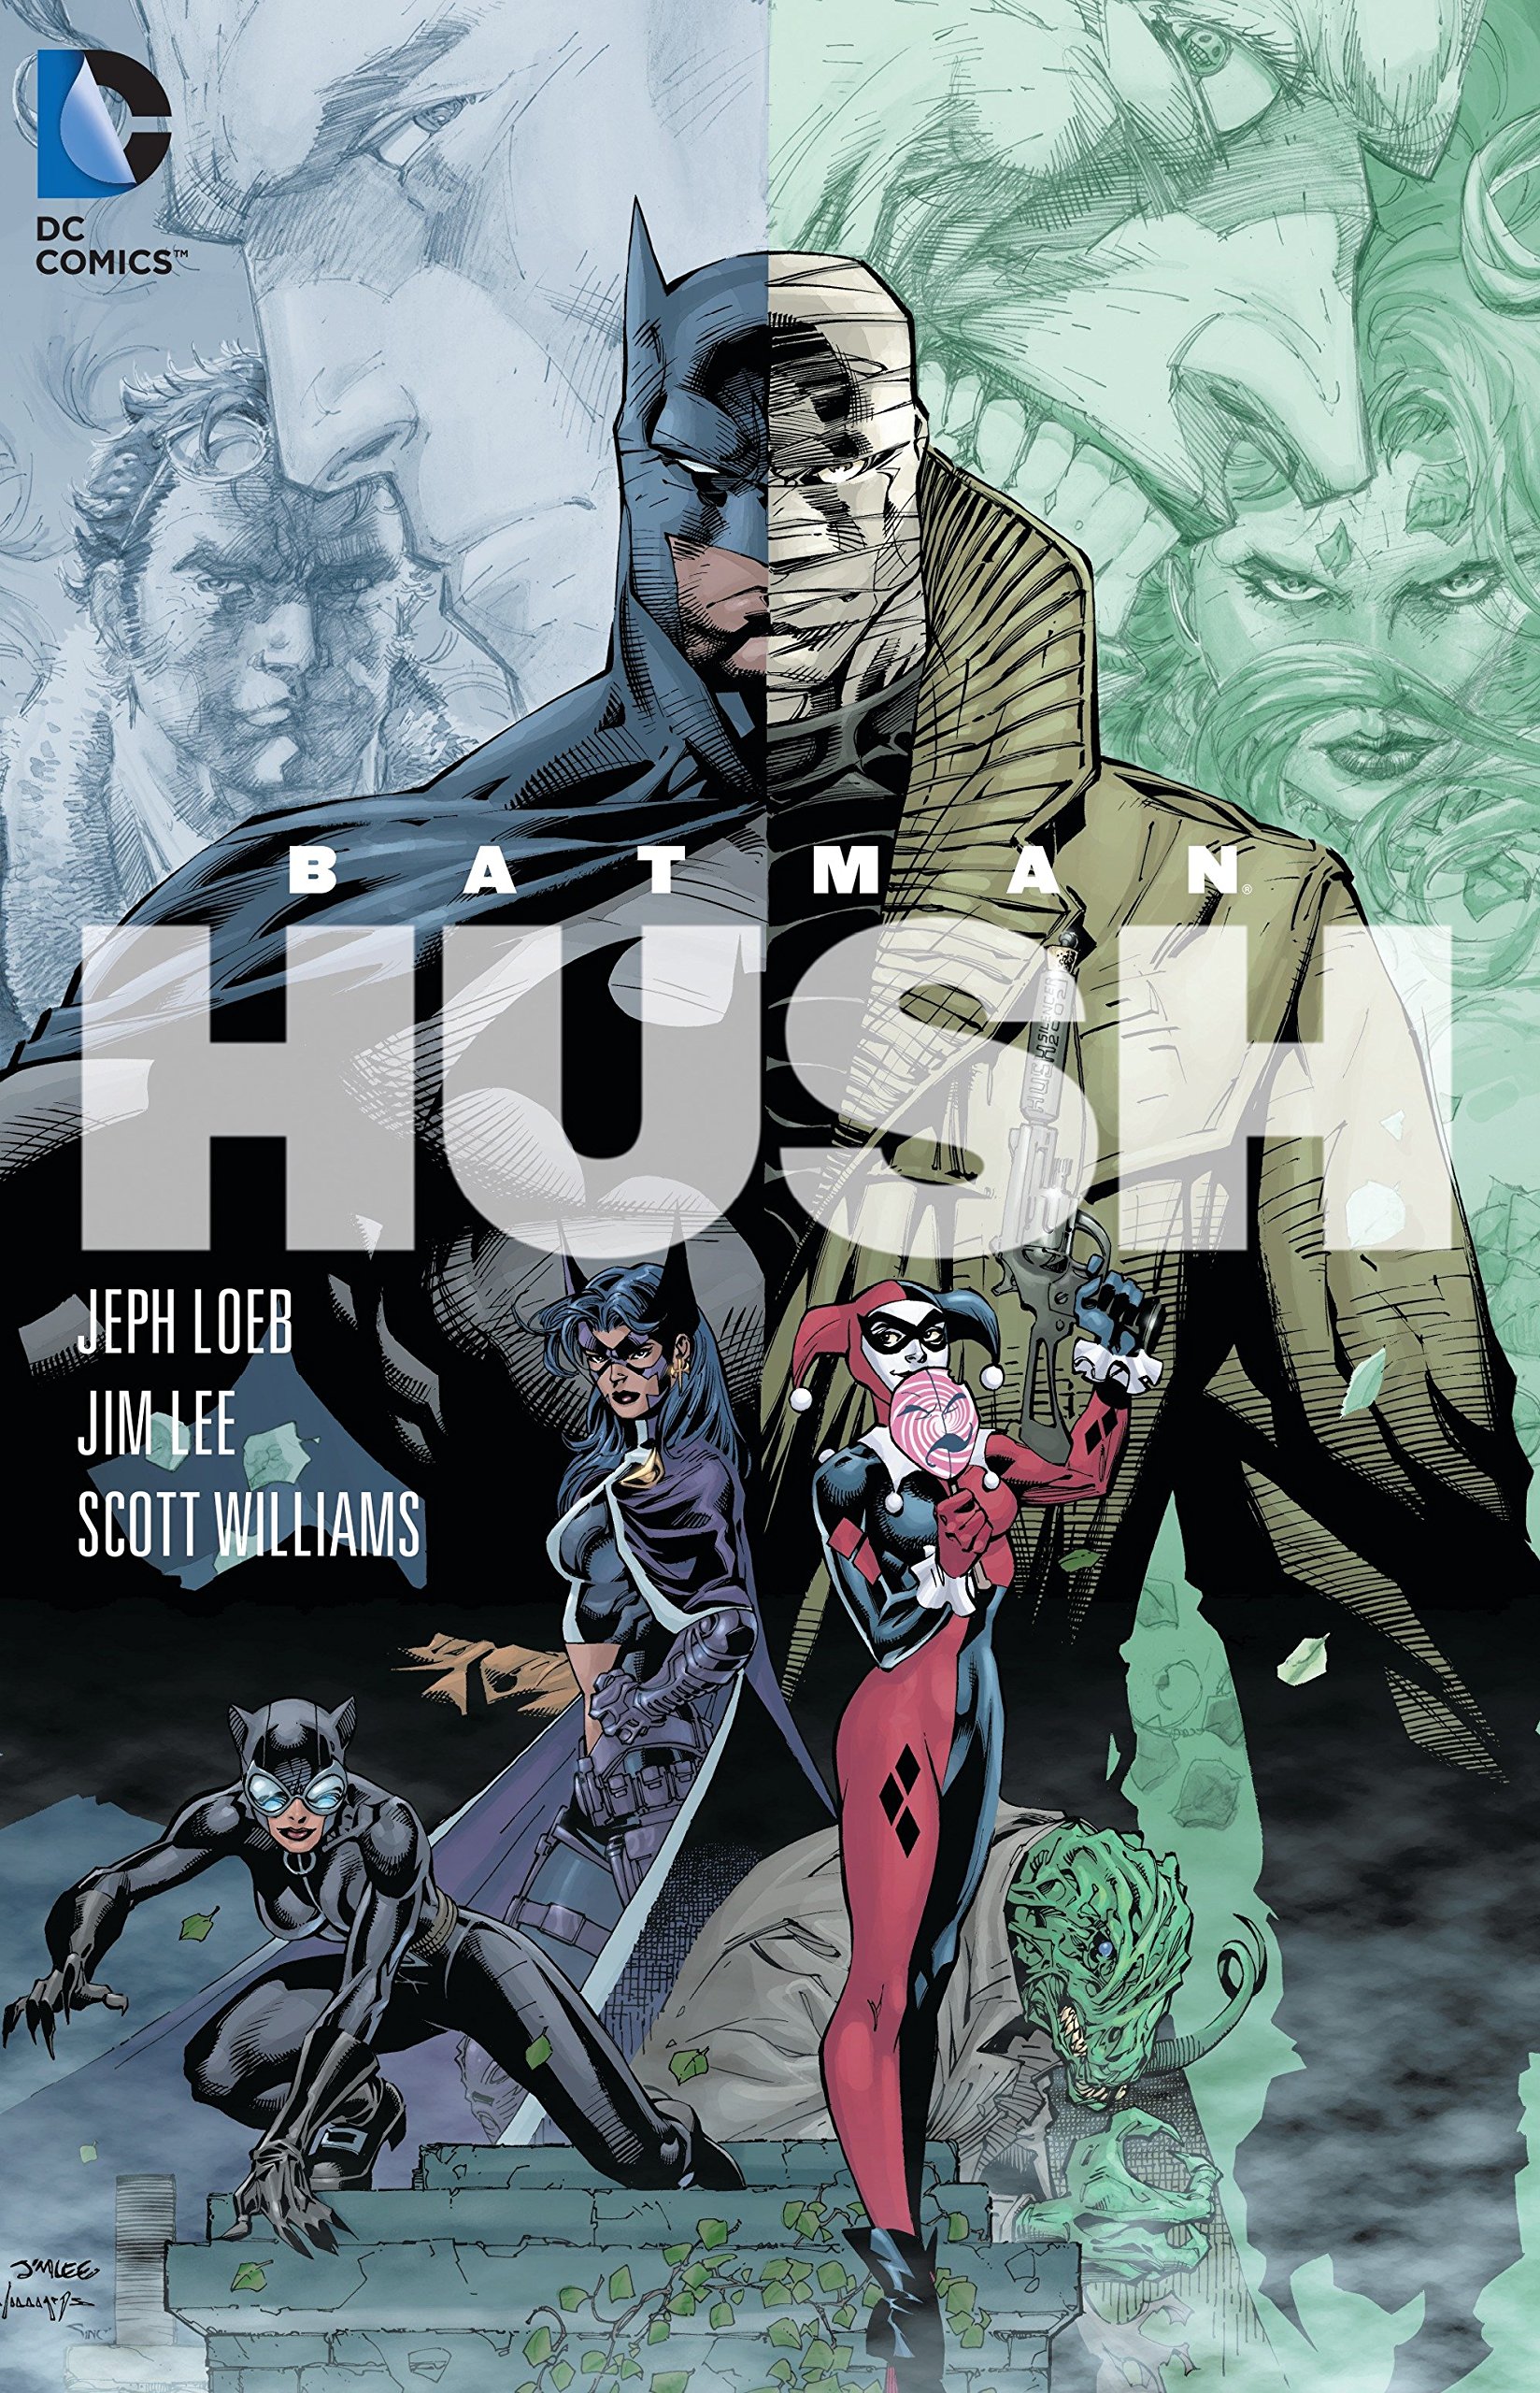 [Image is a graphic novel cover. It shows a half image of Batman with a half image of a man named Hush. His face is covered in bandages and he's wearing a trenchcoat. Below Batman and Hush, there's Huntress and Harley Quinn in her jester look.]